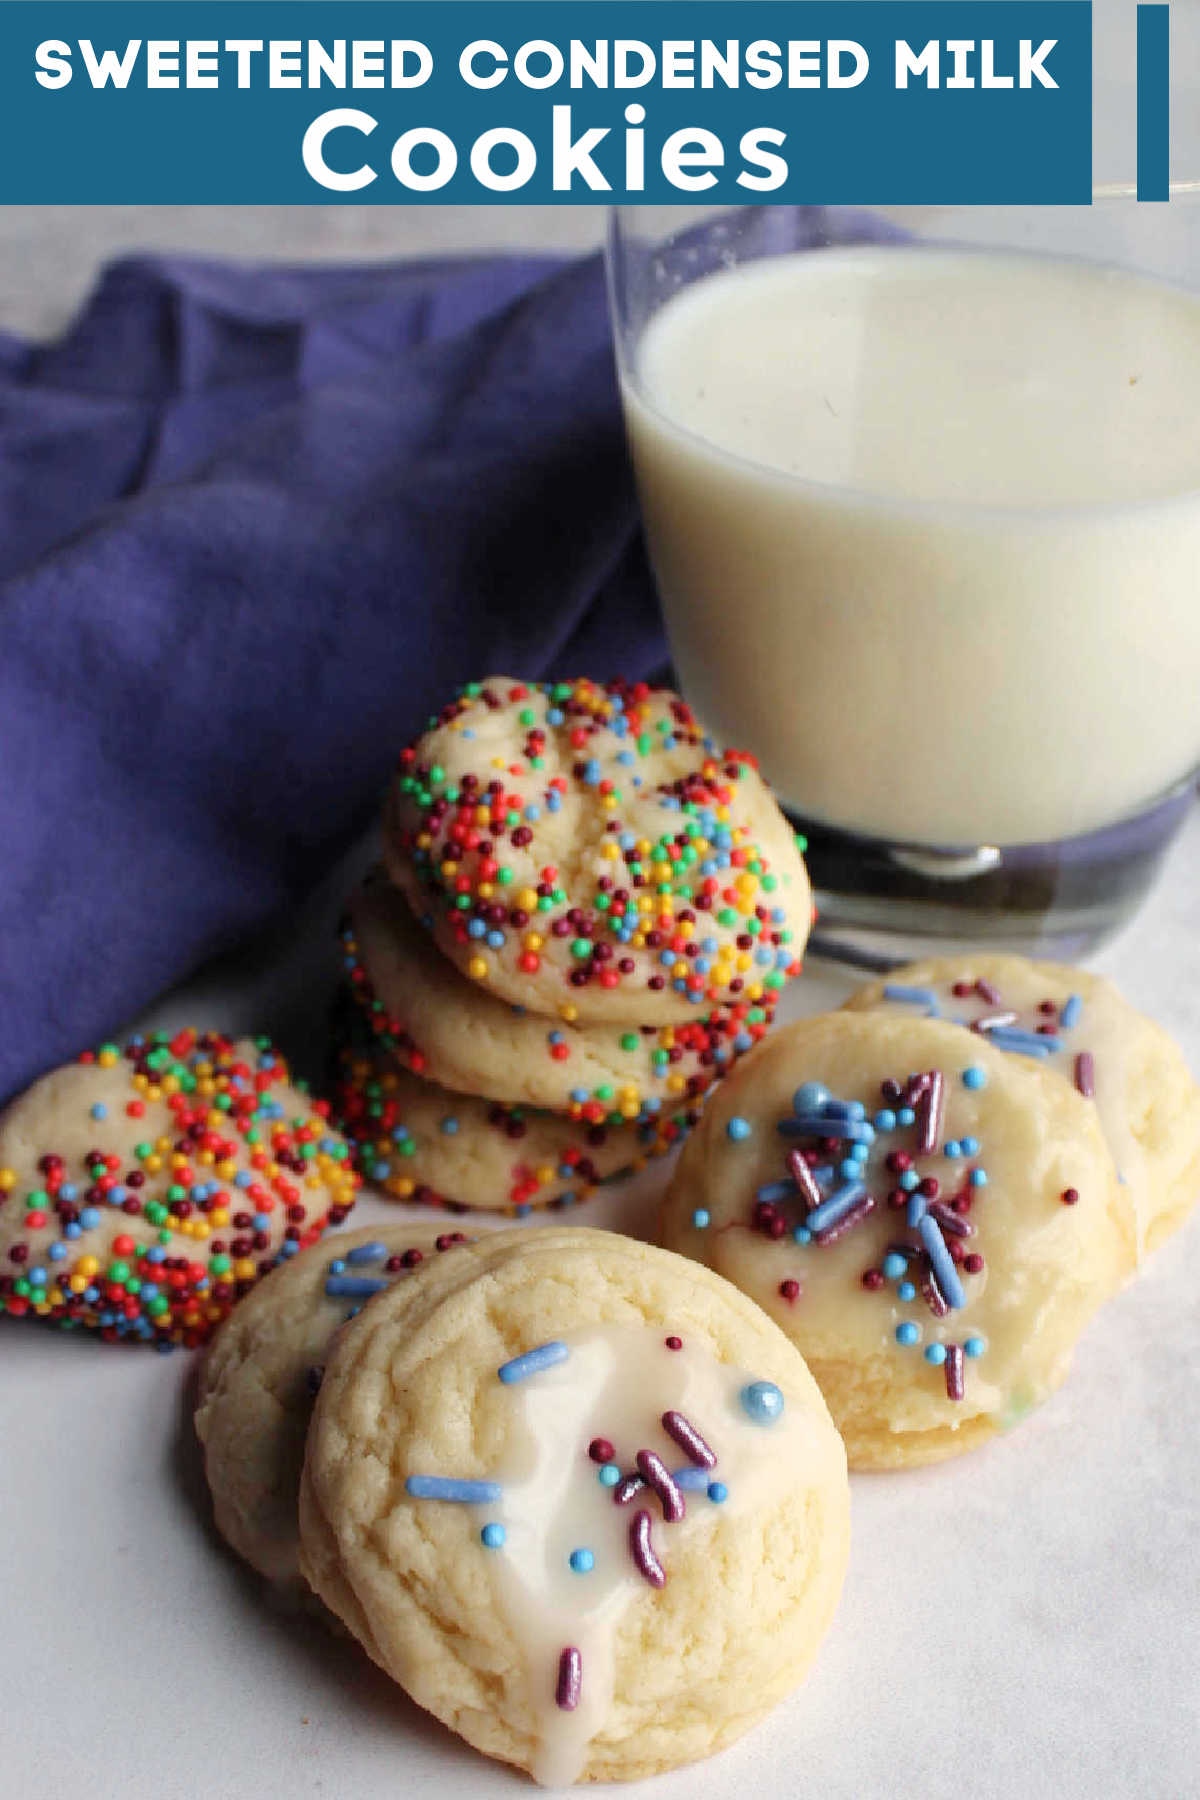 If you like soft simple cookies, these are for you! The sweetened condensed milk adds a rich flavor and great texture to the finished cookies.